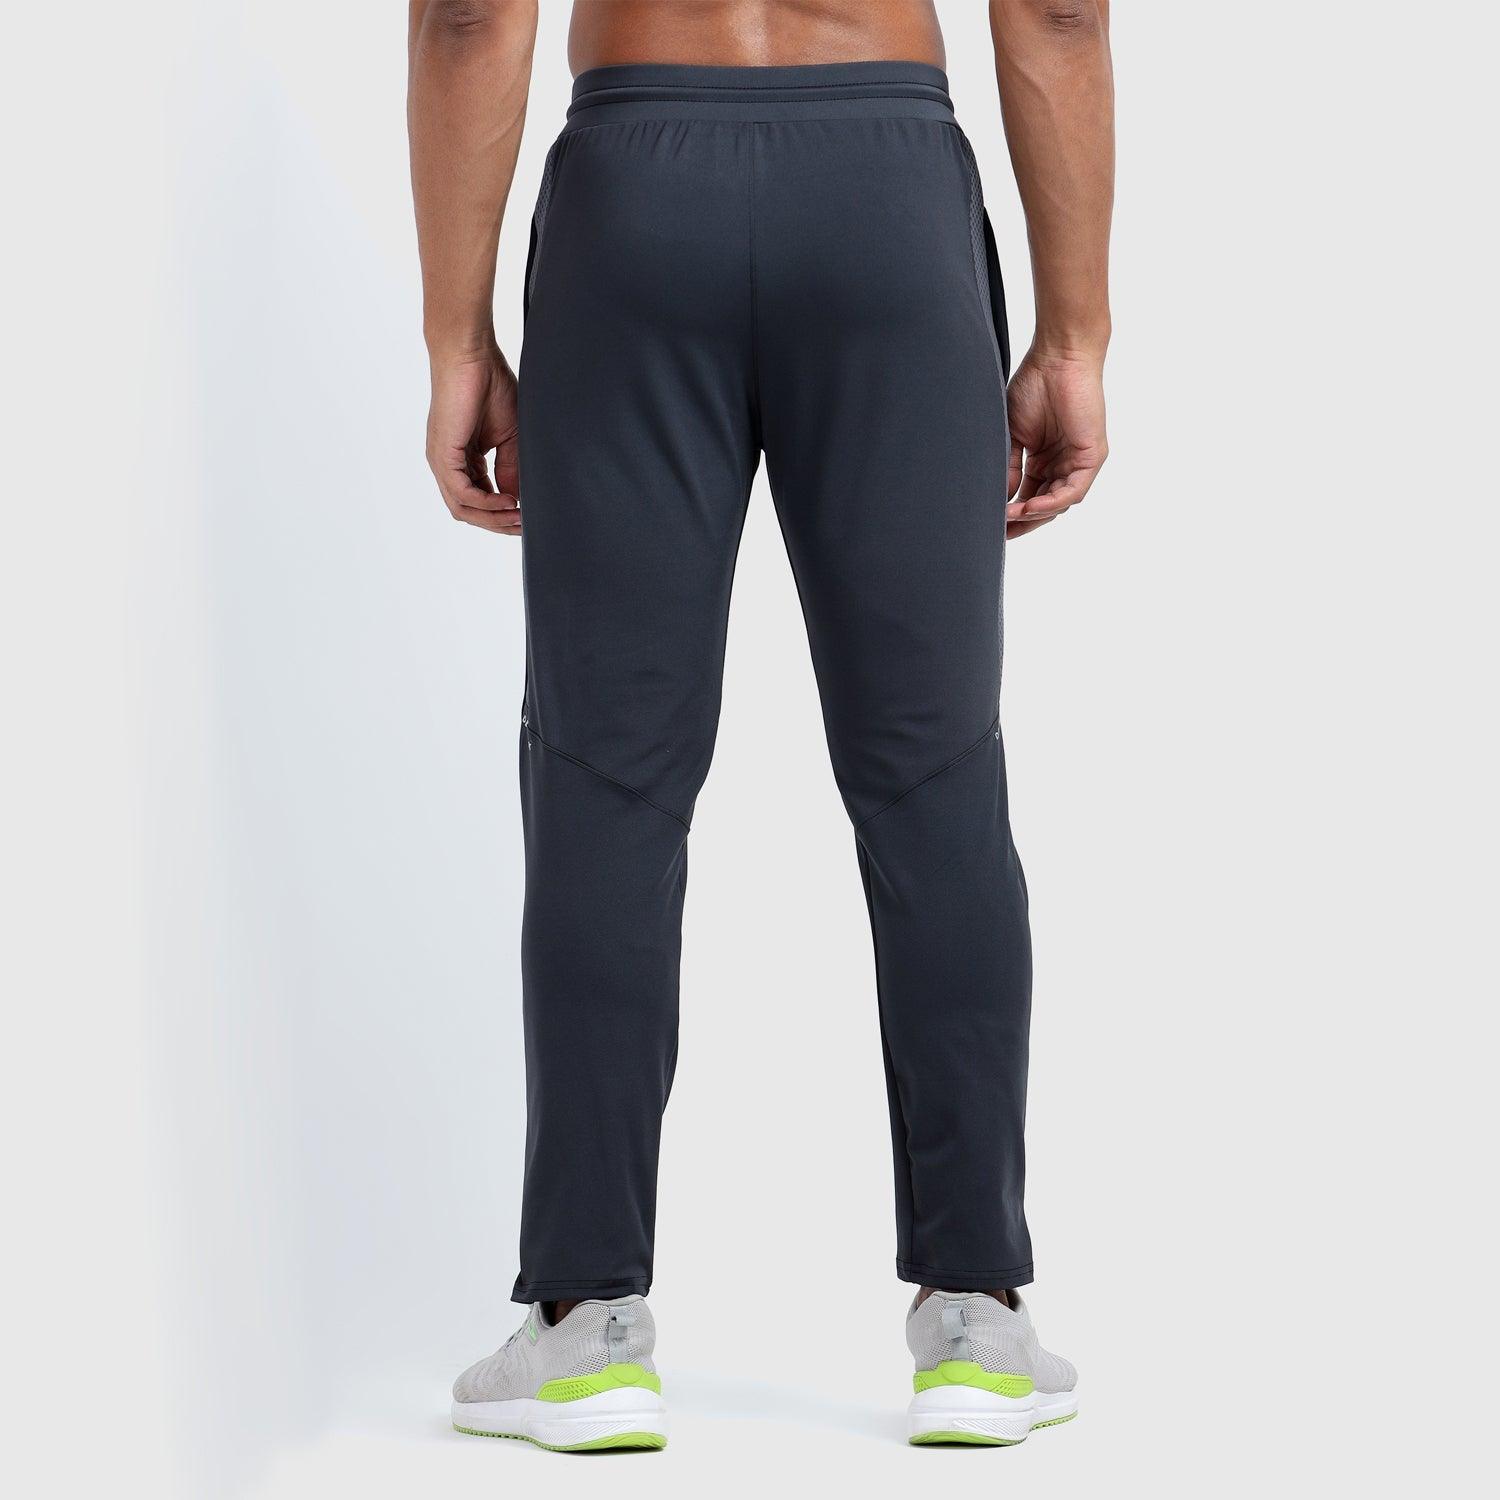 Denmonk: Elevate your look with these Urbanstribe sharp charcoal joggers for mens.